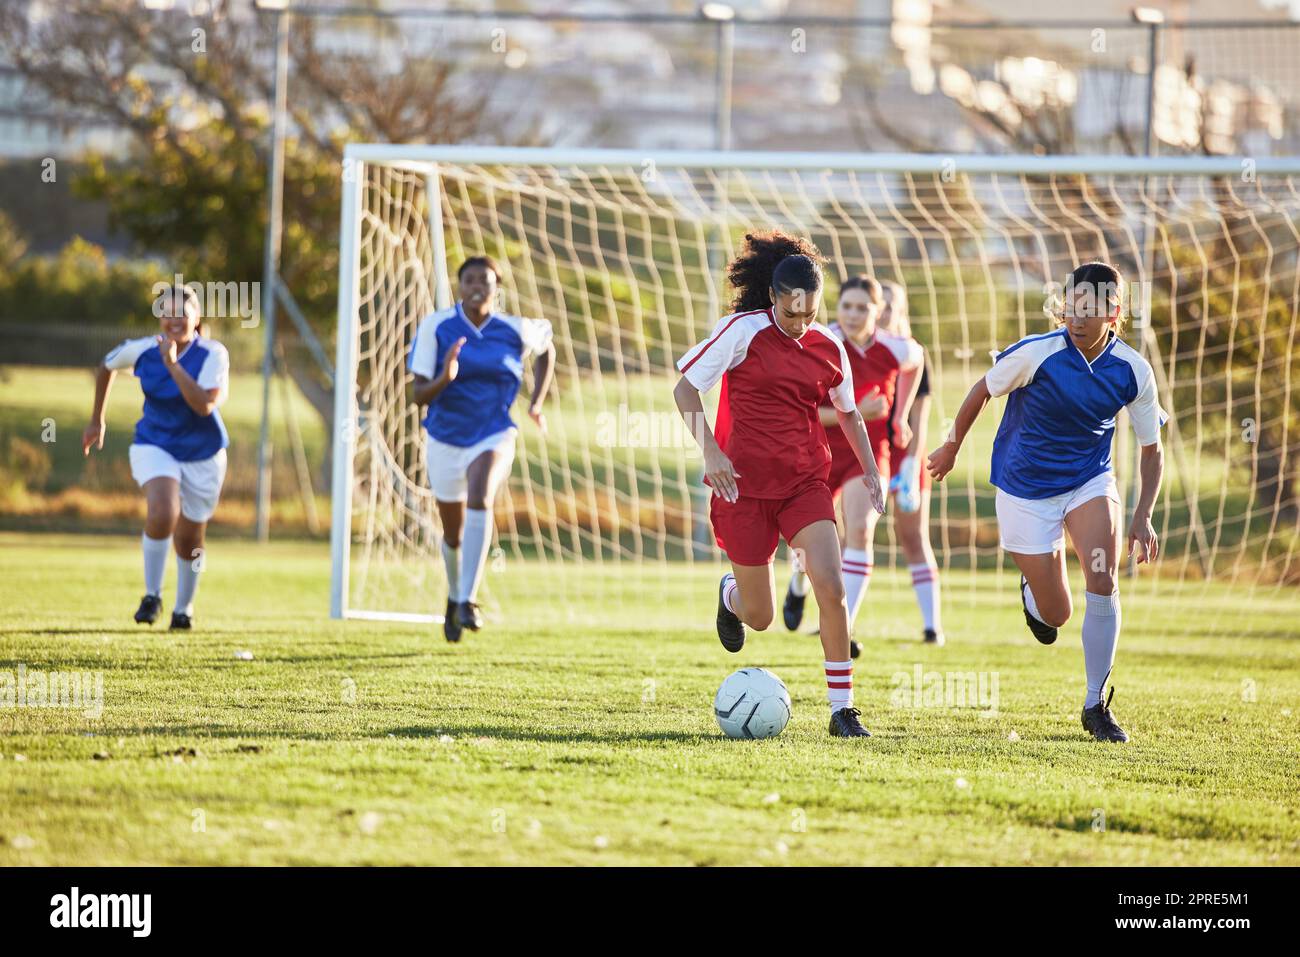 Sports team, girl soccer and kick ball on field in a tournament. Football, competition and athletic female teen group play game on grass. Fit adolescents compete to win match at school championship. Stock Photo